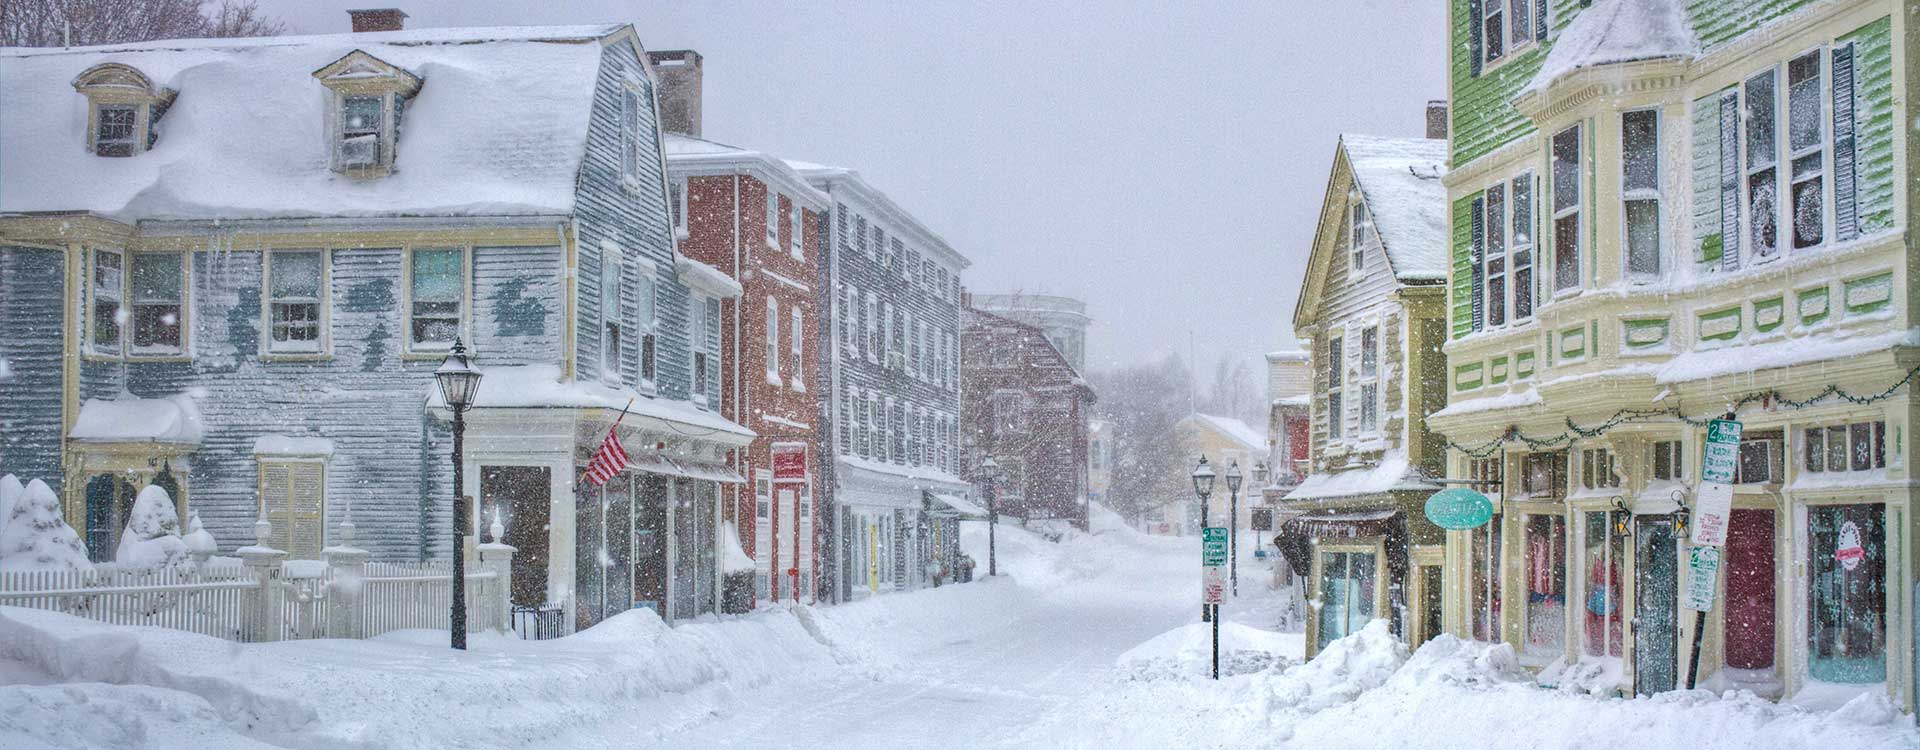 Marblehead Downtown Snow by Mike Porter